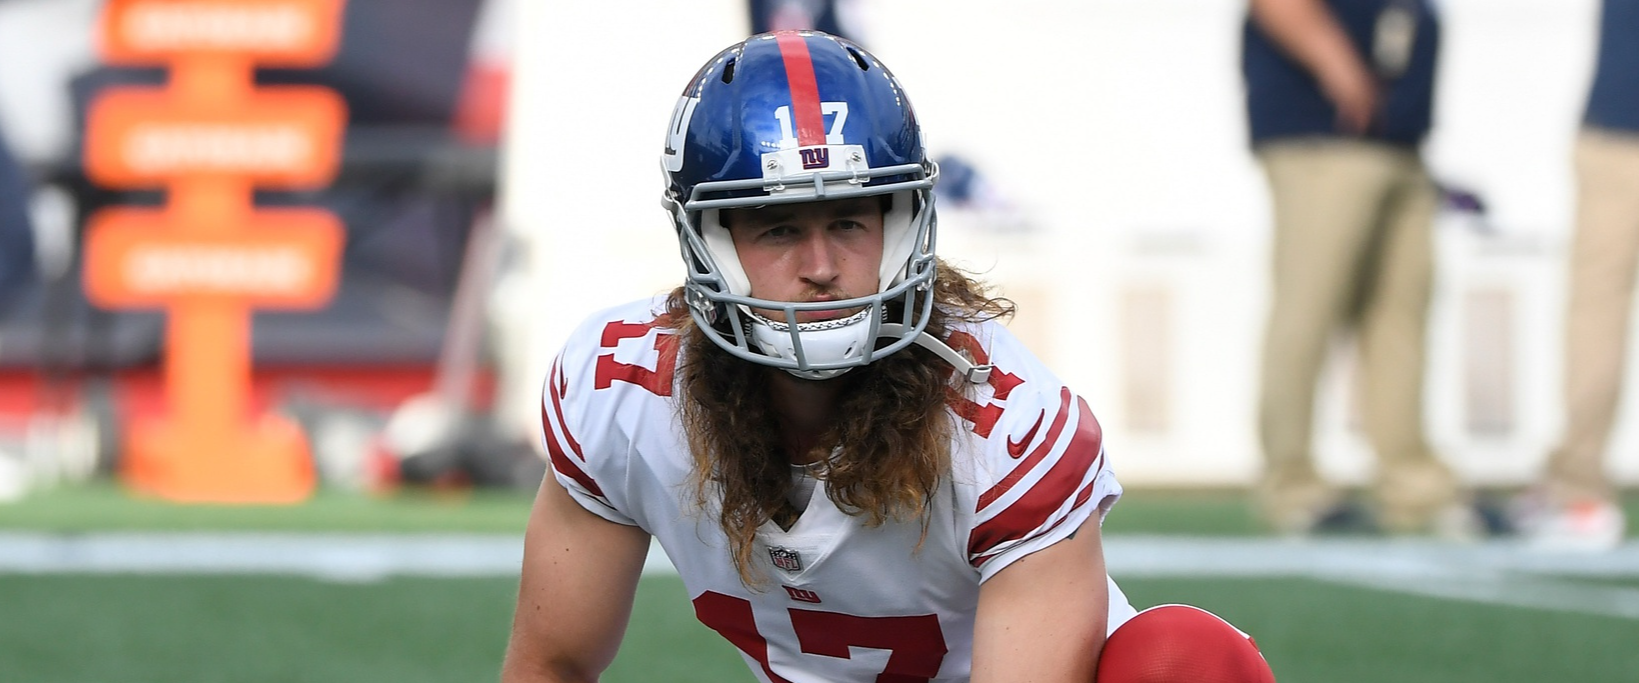 Giants punter remains in London amid passport issues